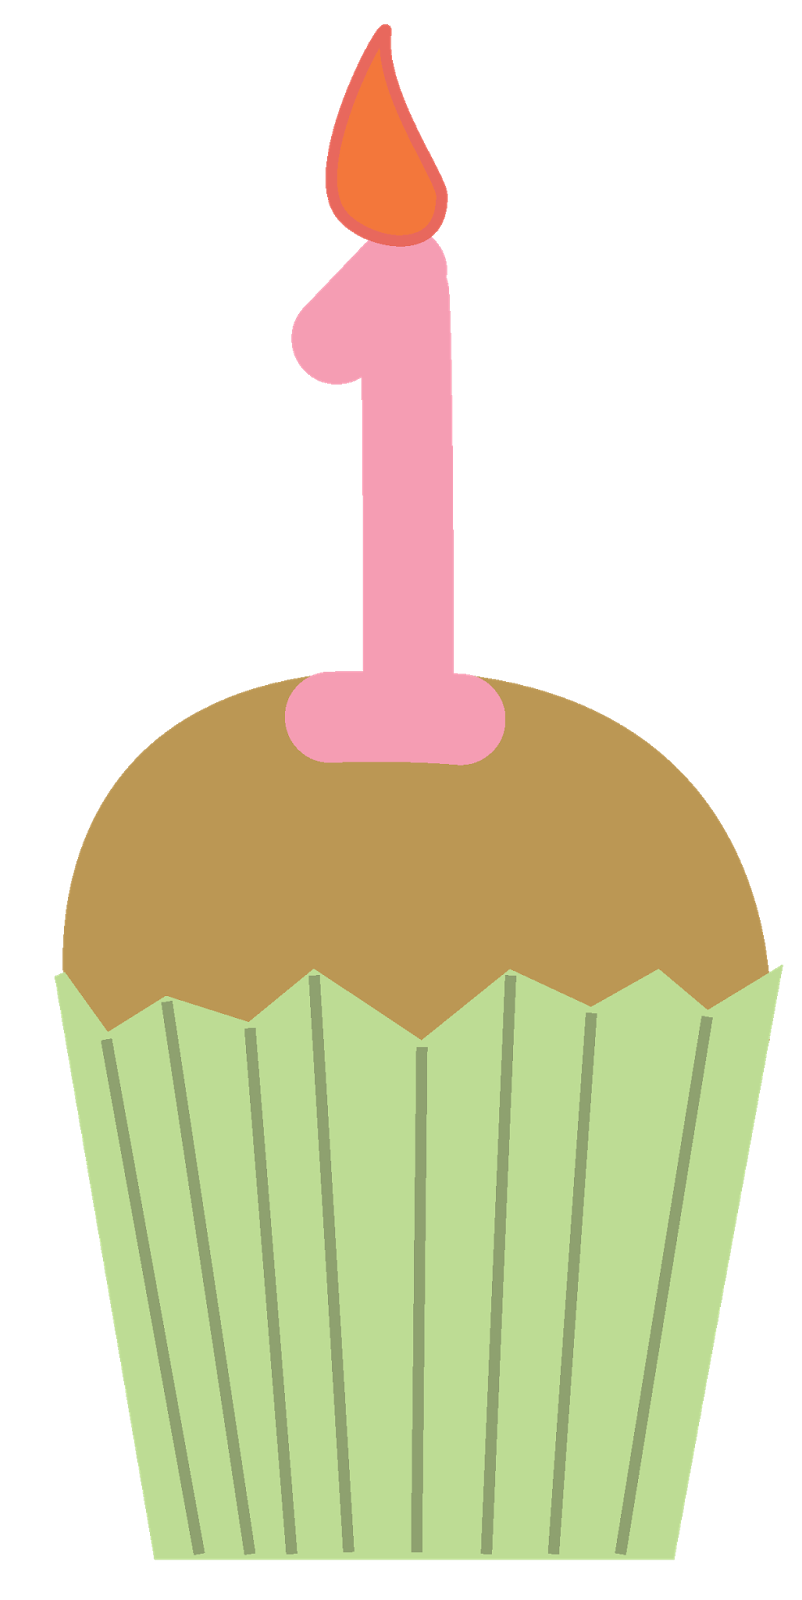 Birthday free large images. Cupcakes clipart animated